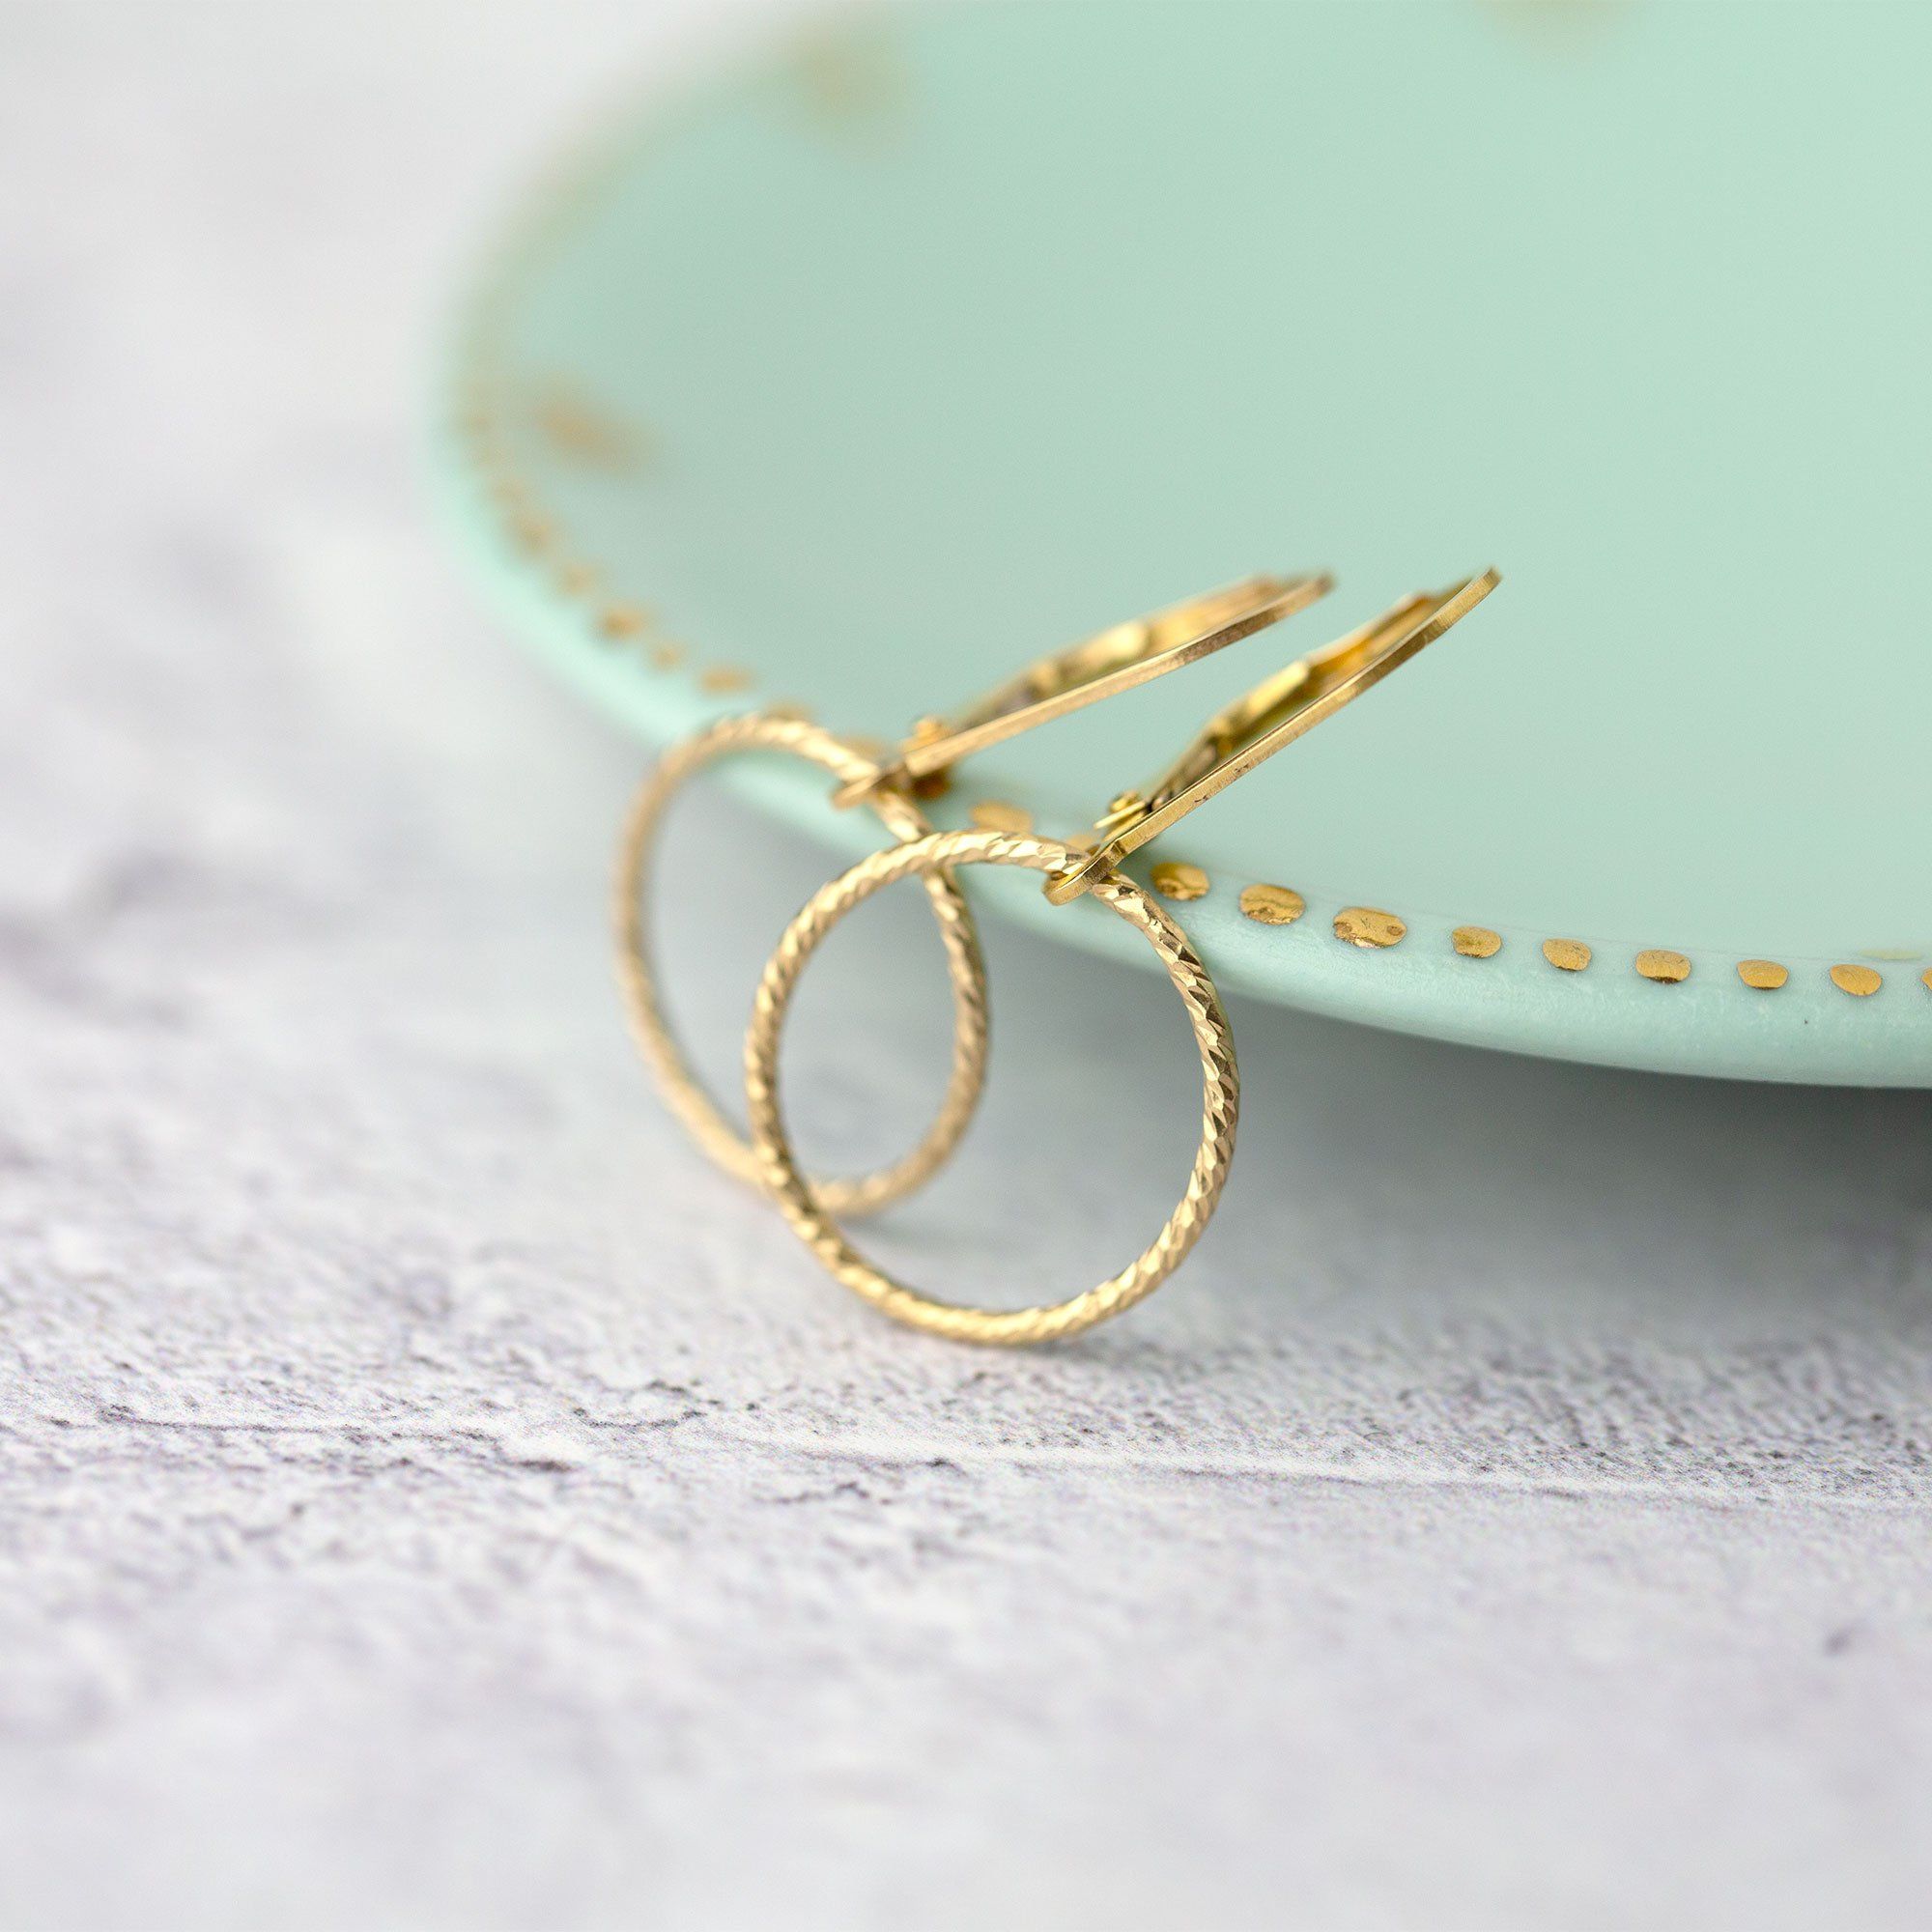 Sparkle Gold Circle Lever-back Earrings - Handmade Jewelry by Burnish